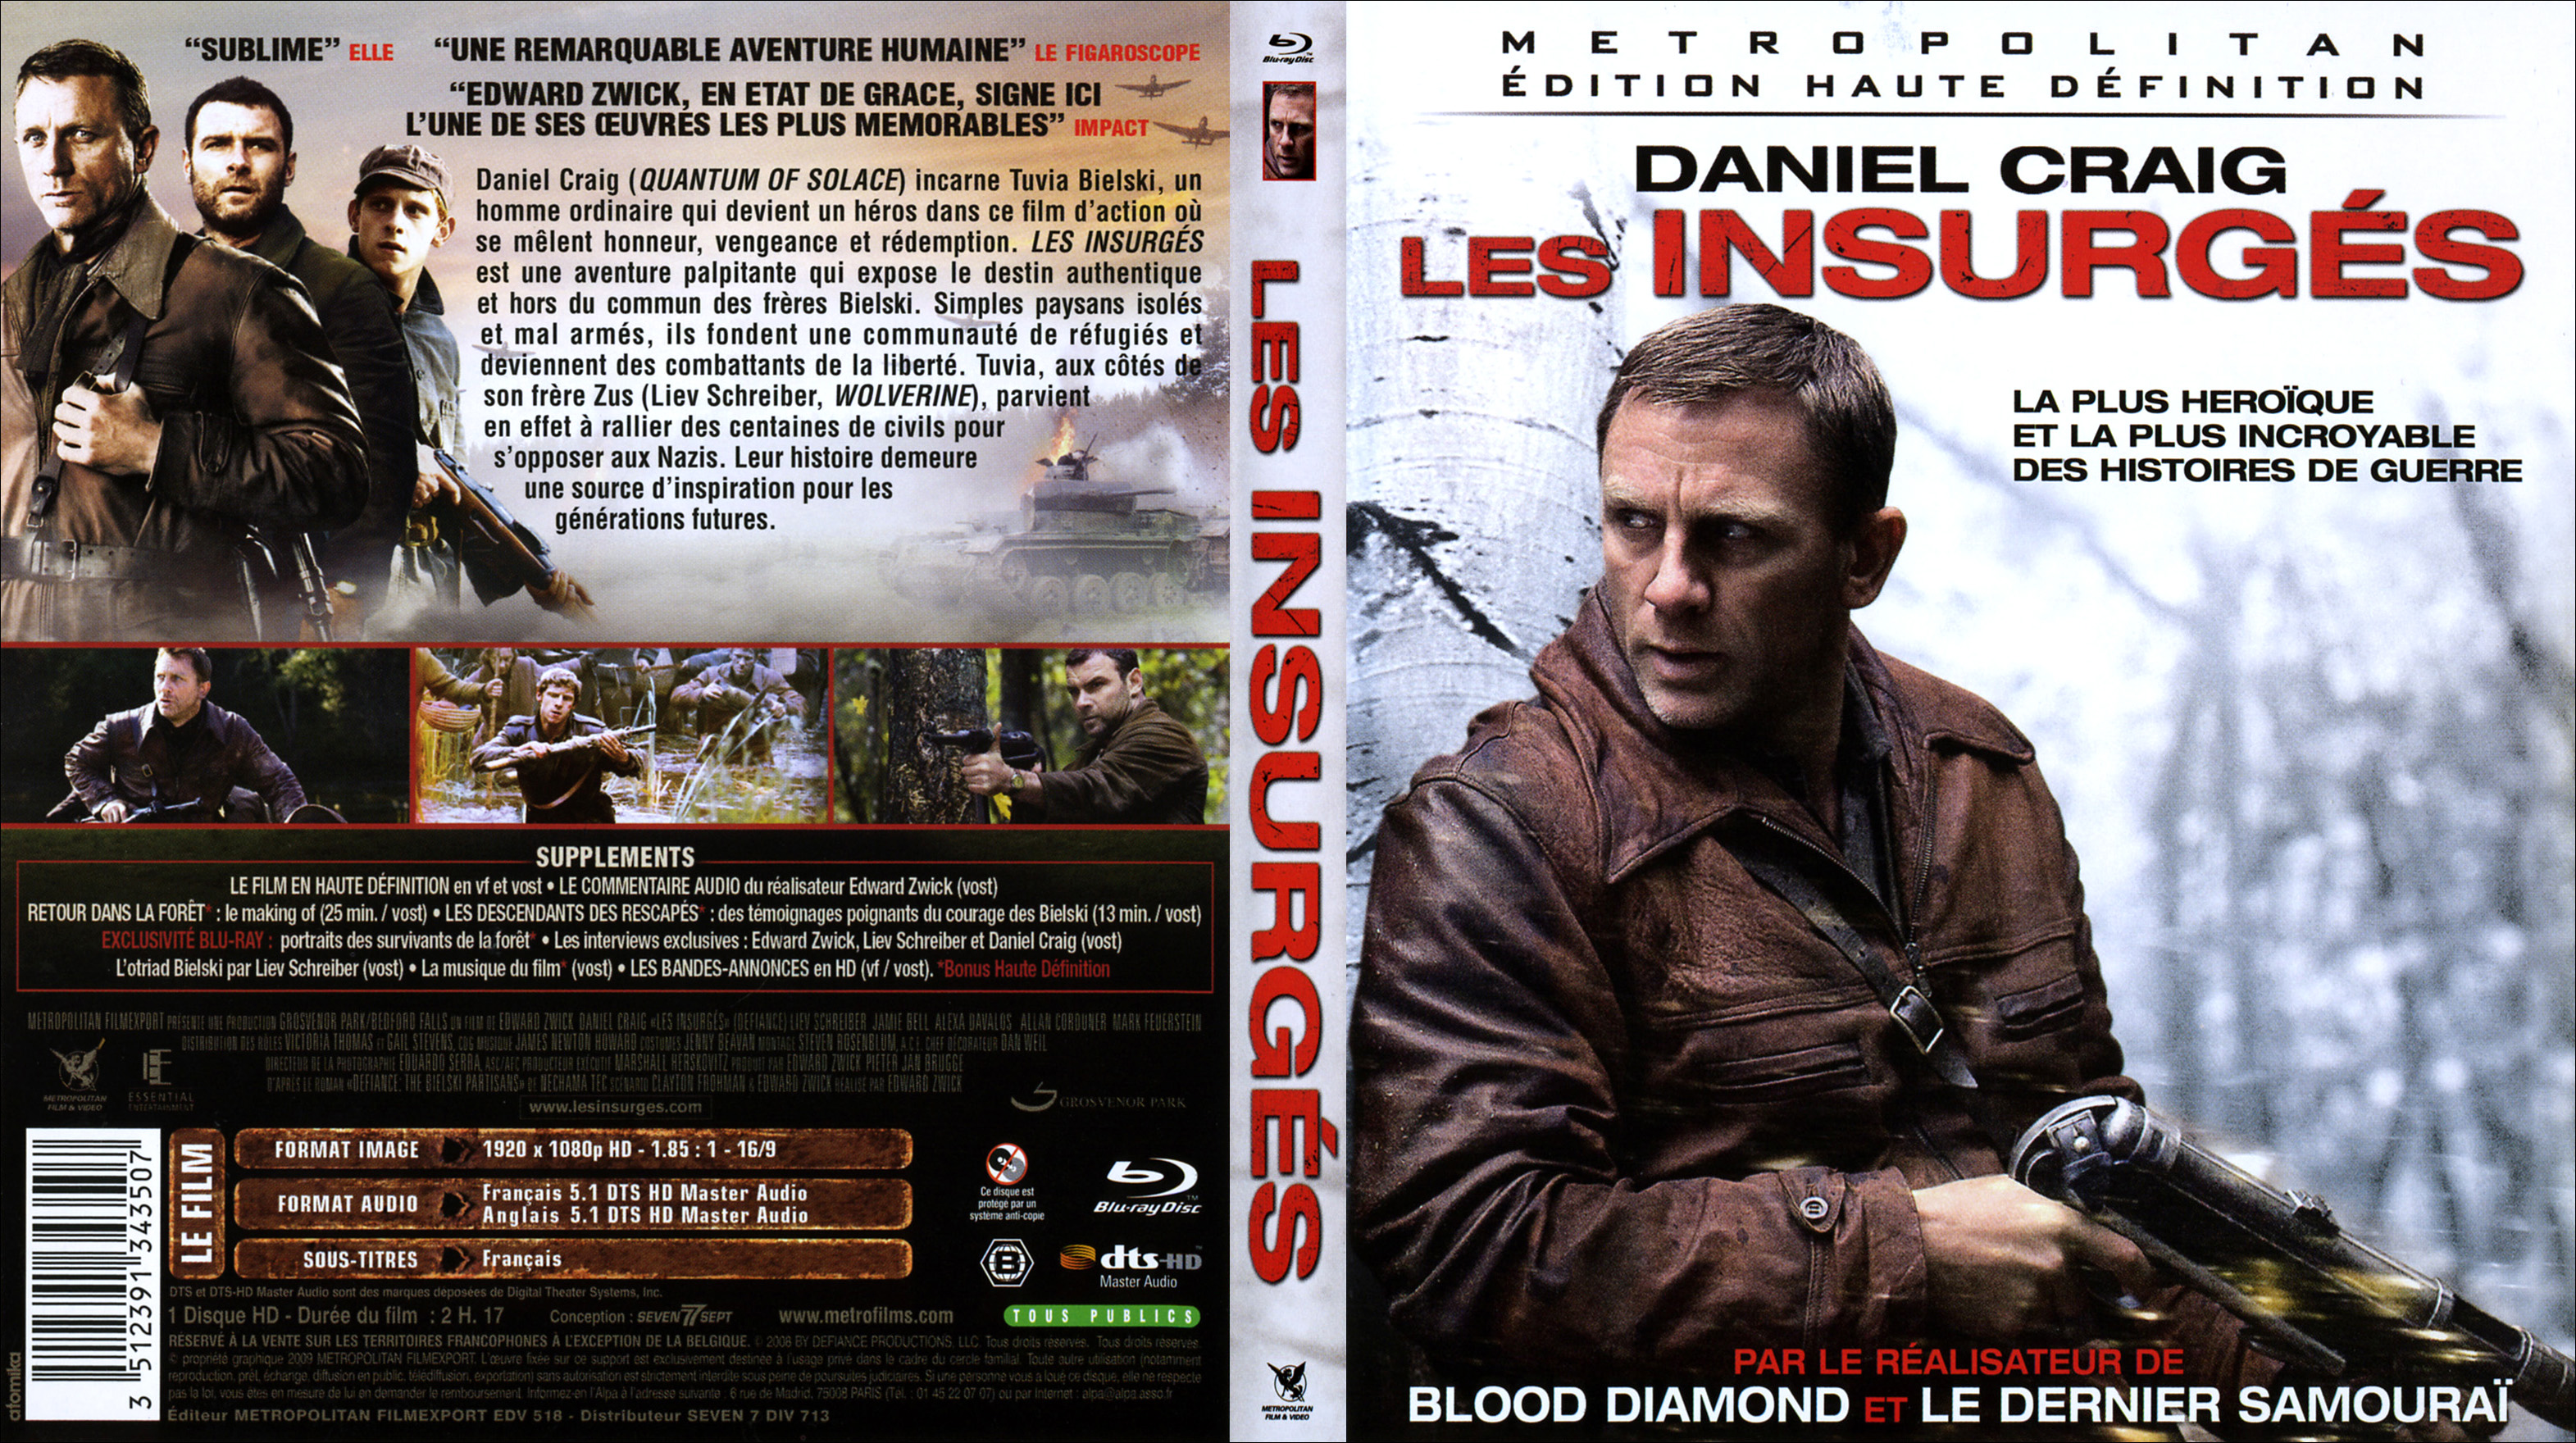 Jaquette DVD Les insurgs (BLU-RAY)